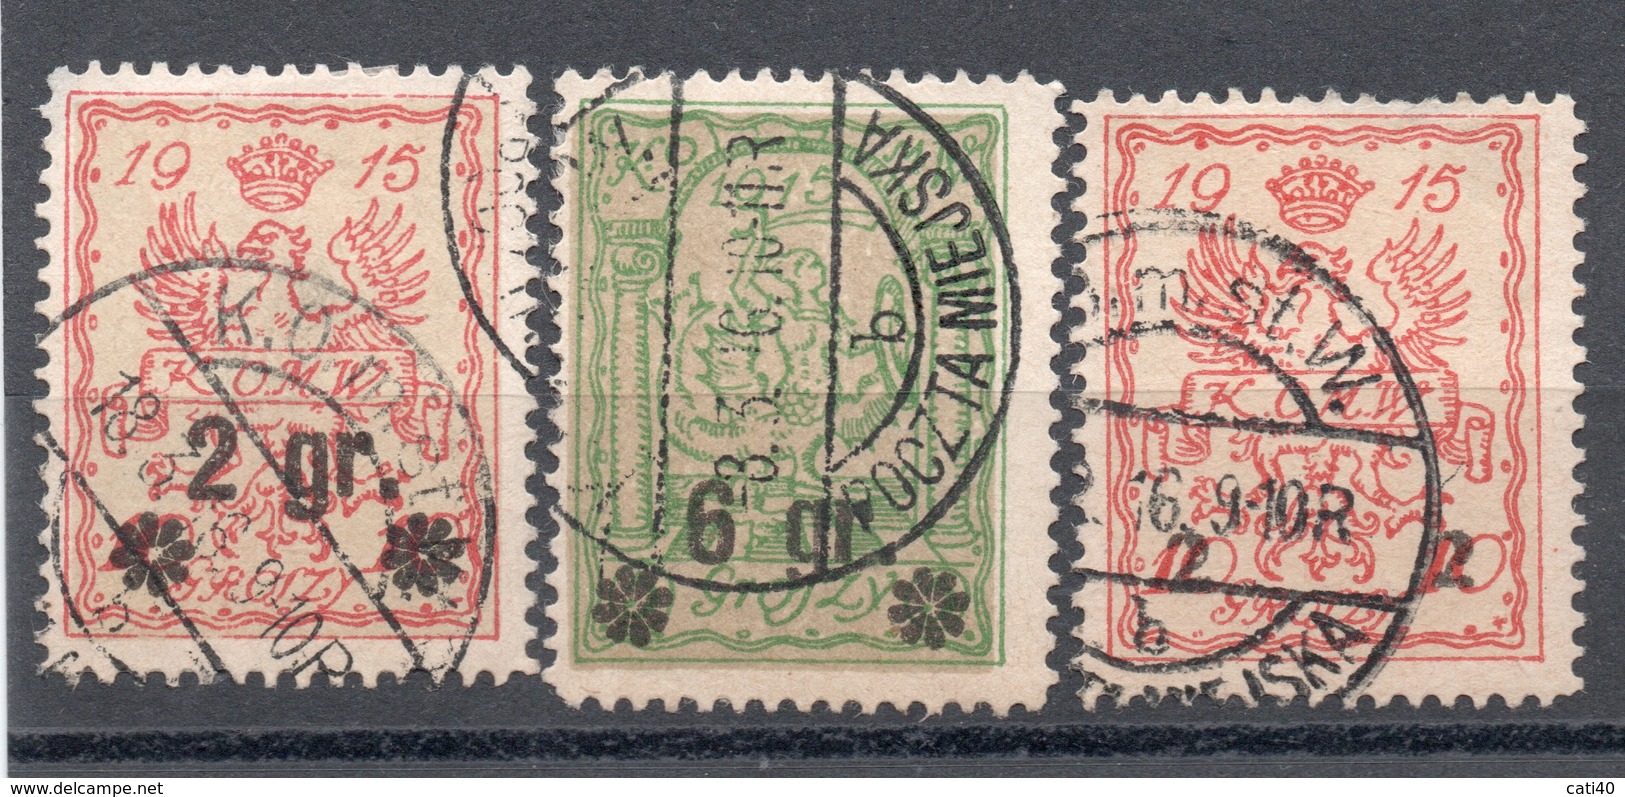 POLONIA POLOGNE 1915  POSTA LOCALE - Used Stamps